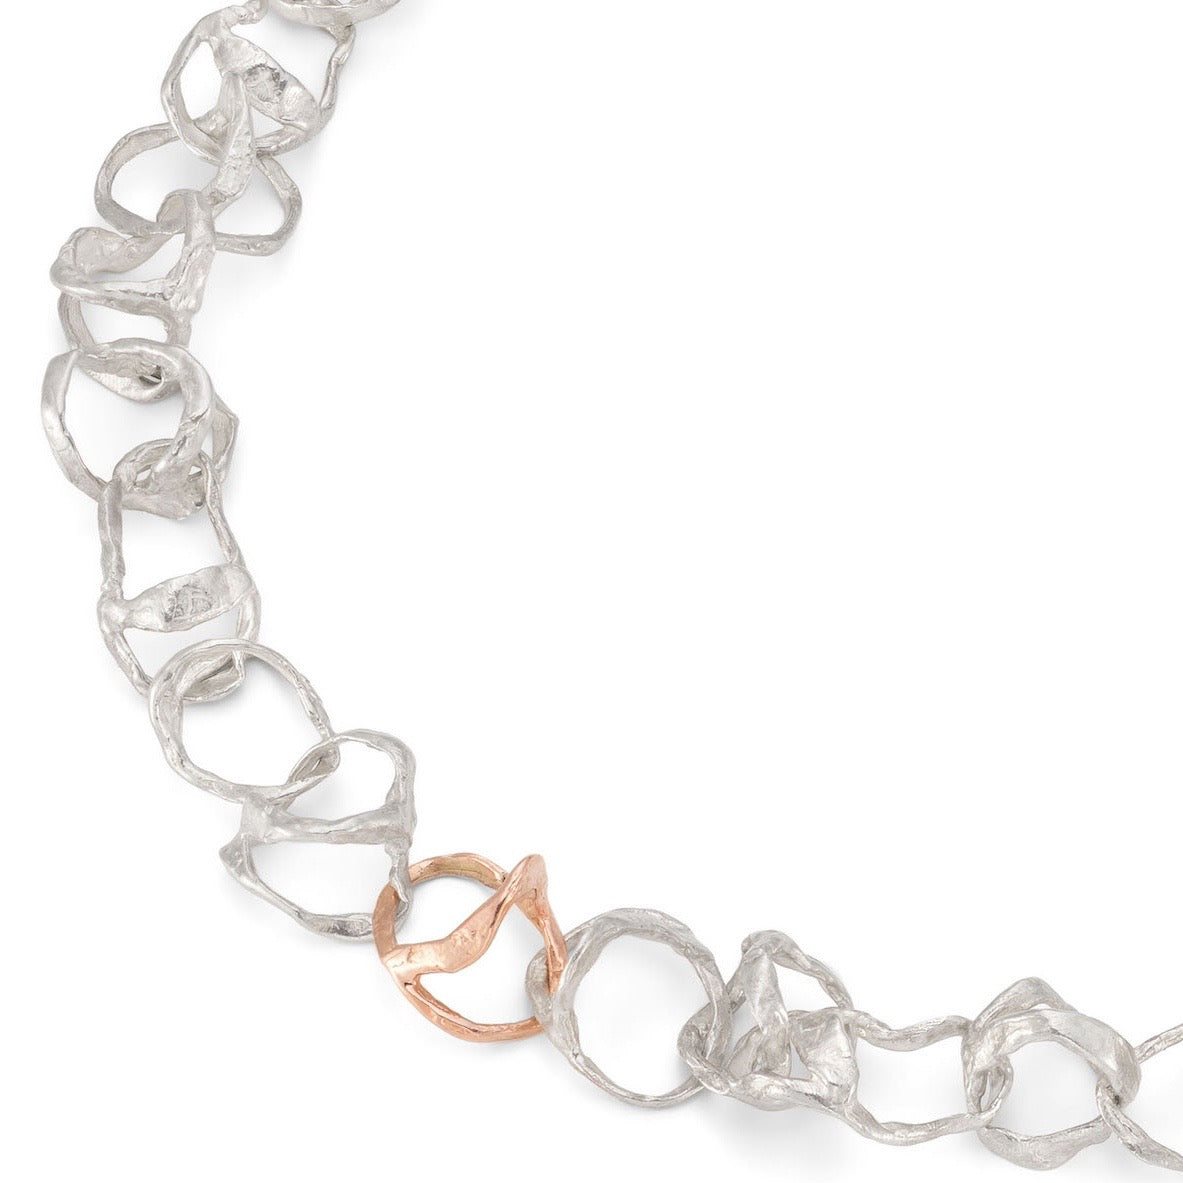 Tangle Silver Necklace with 9ct Rose Gold Link